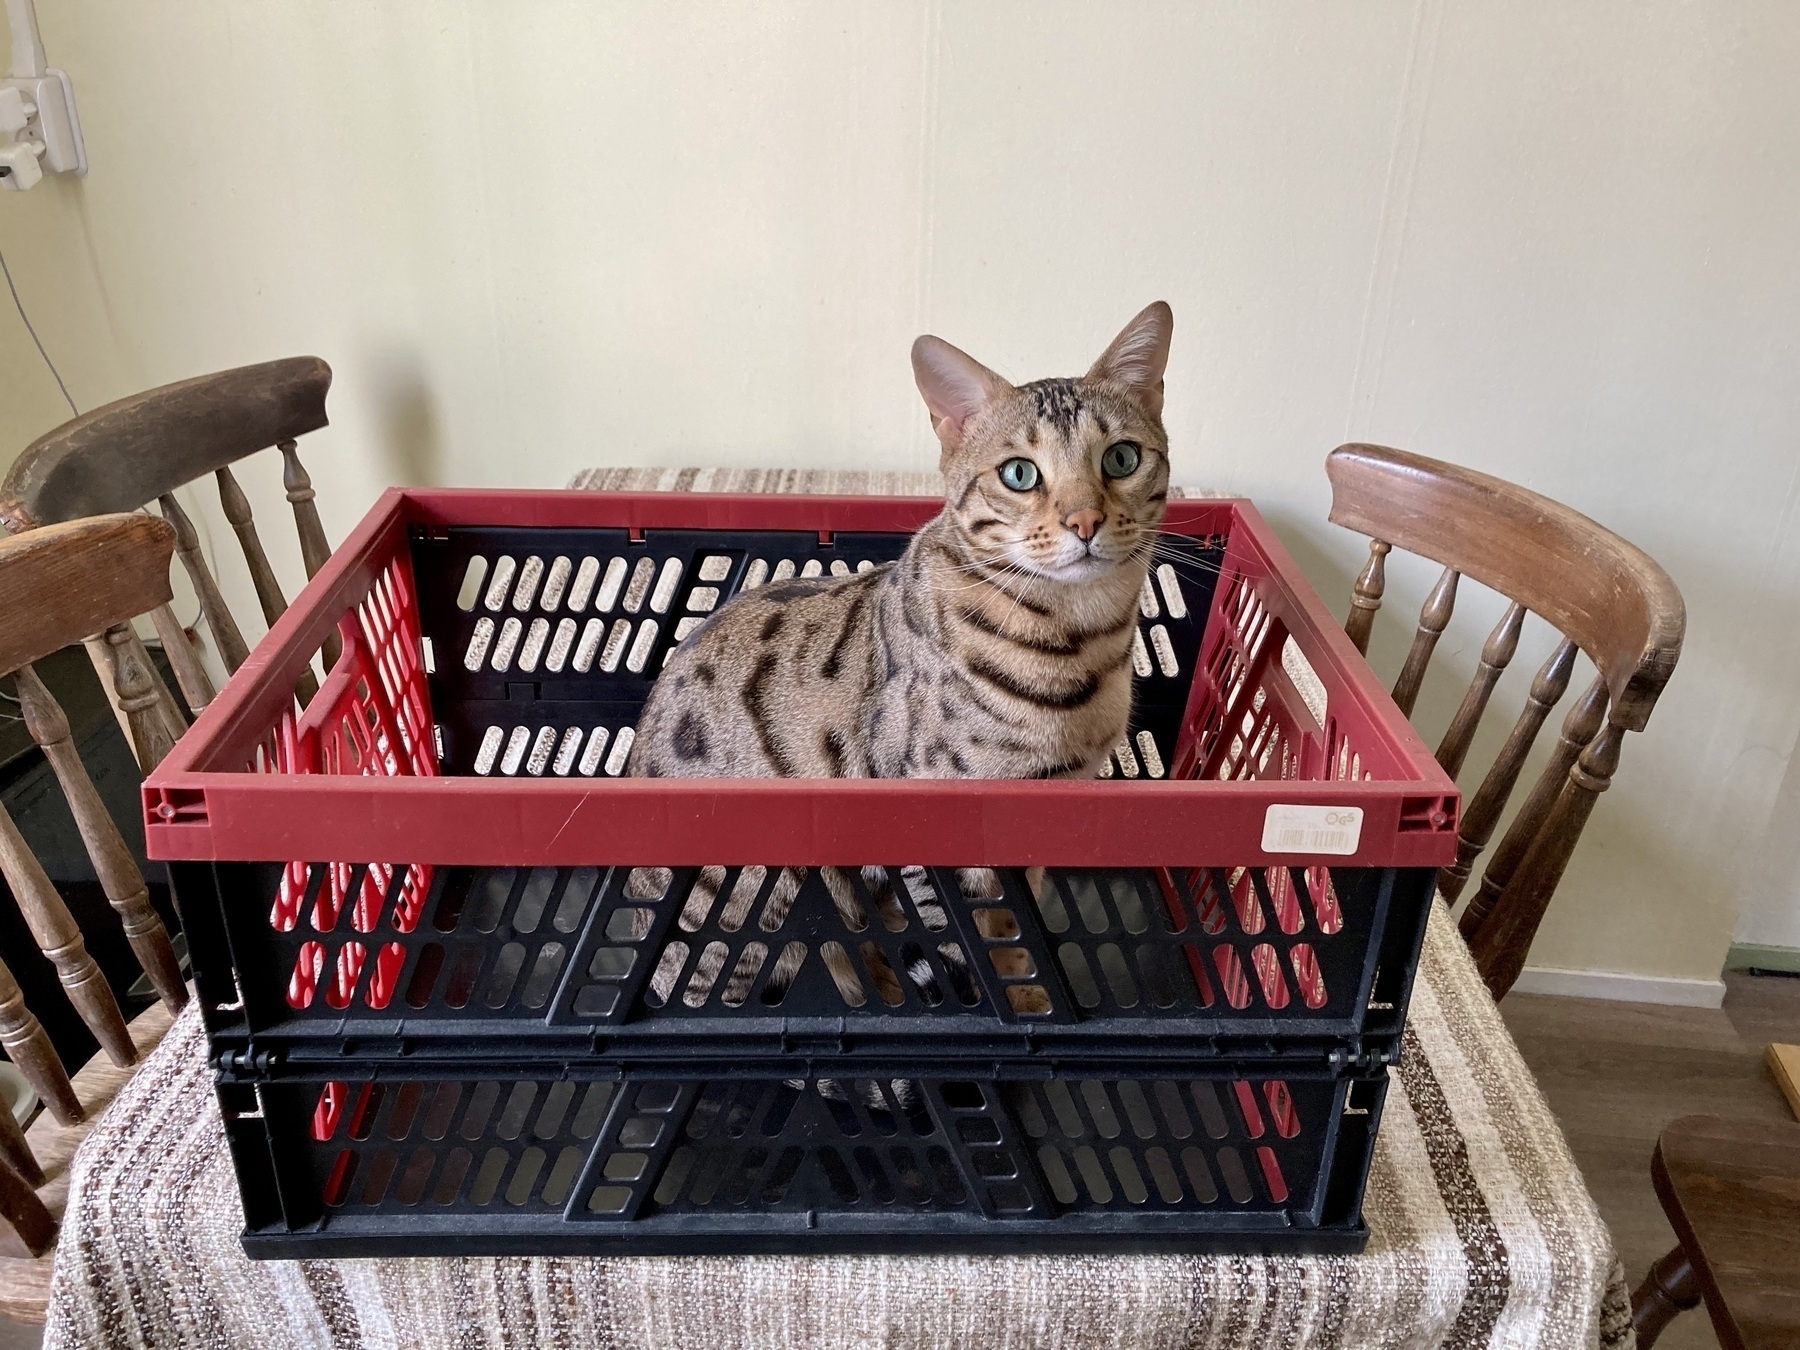 Cat sits in shopping crate, looks quite smug of itself 